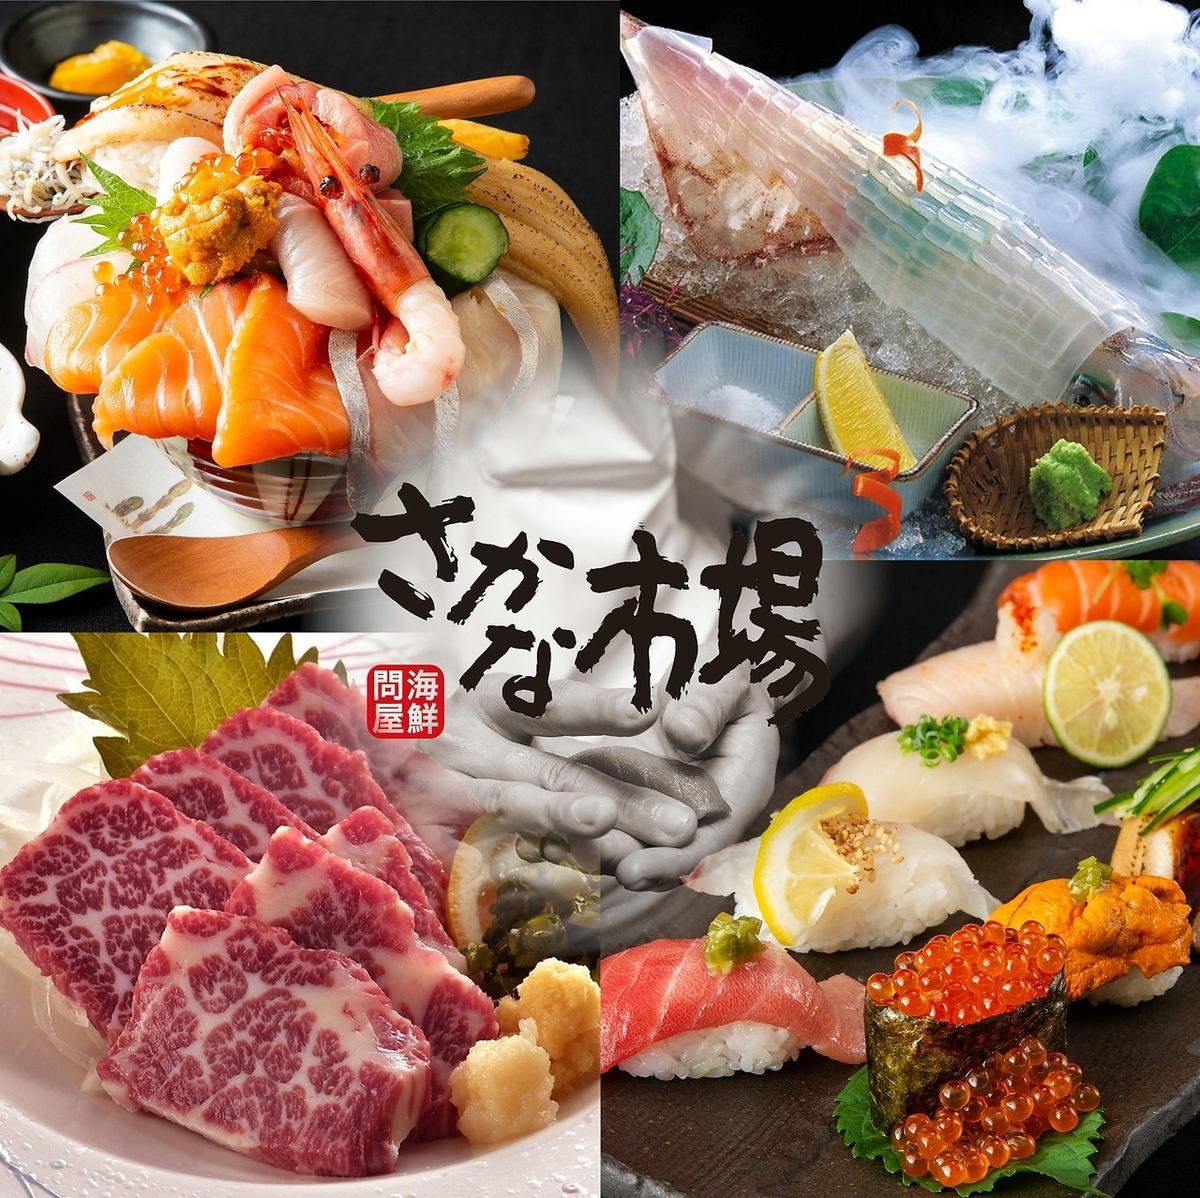 A seafood izakaya with delicious live squid and fresh seafood!